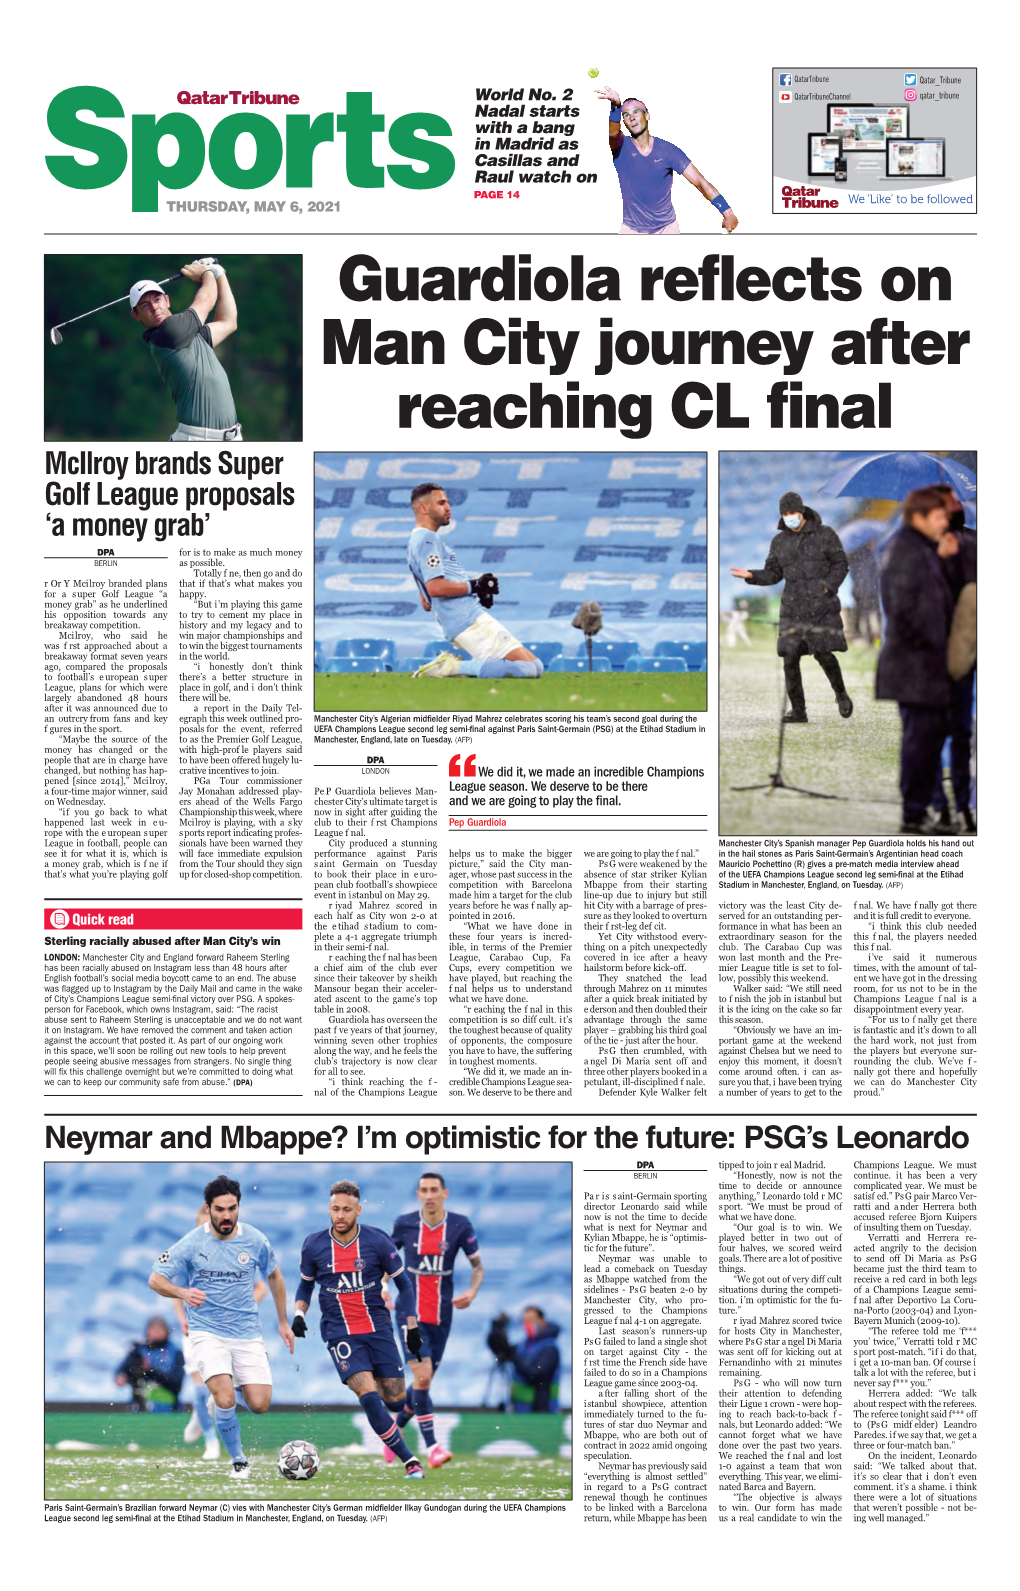 Guardiola Reflects on Man City Journey After Reaching CL Final